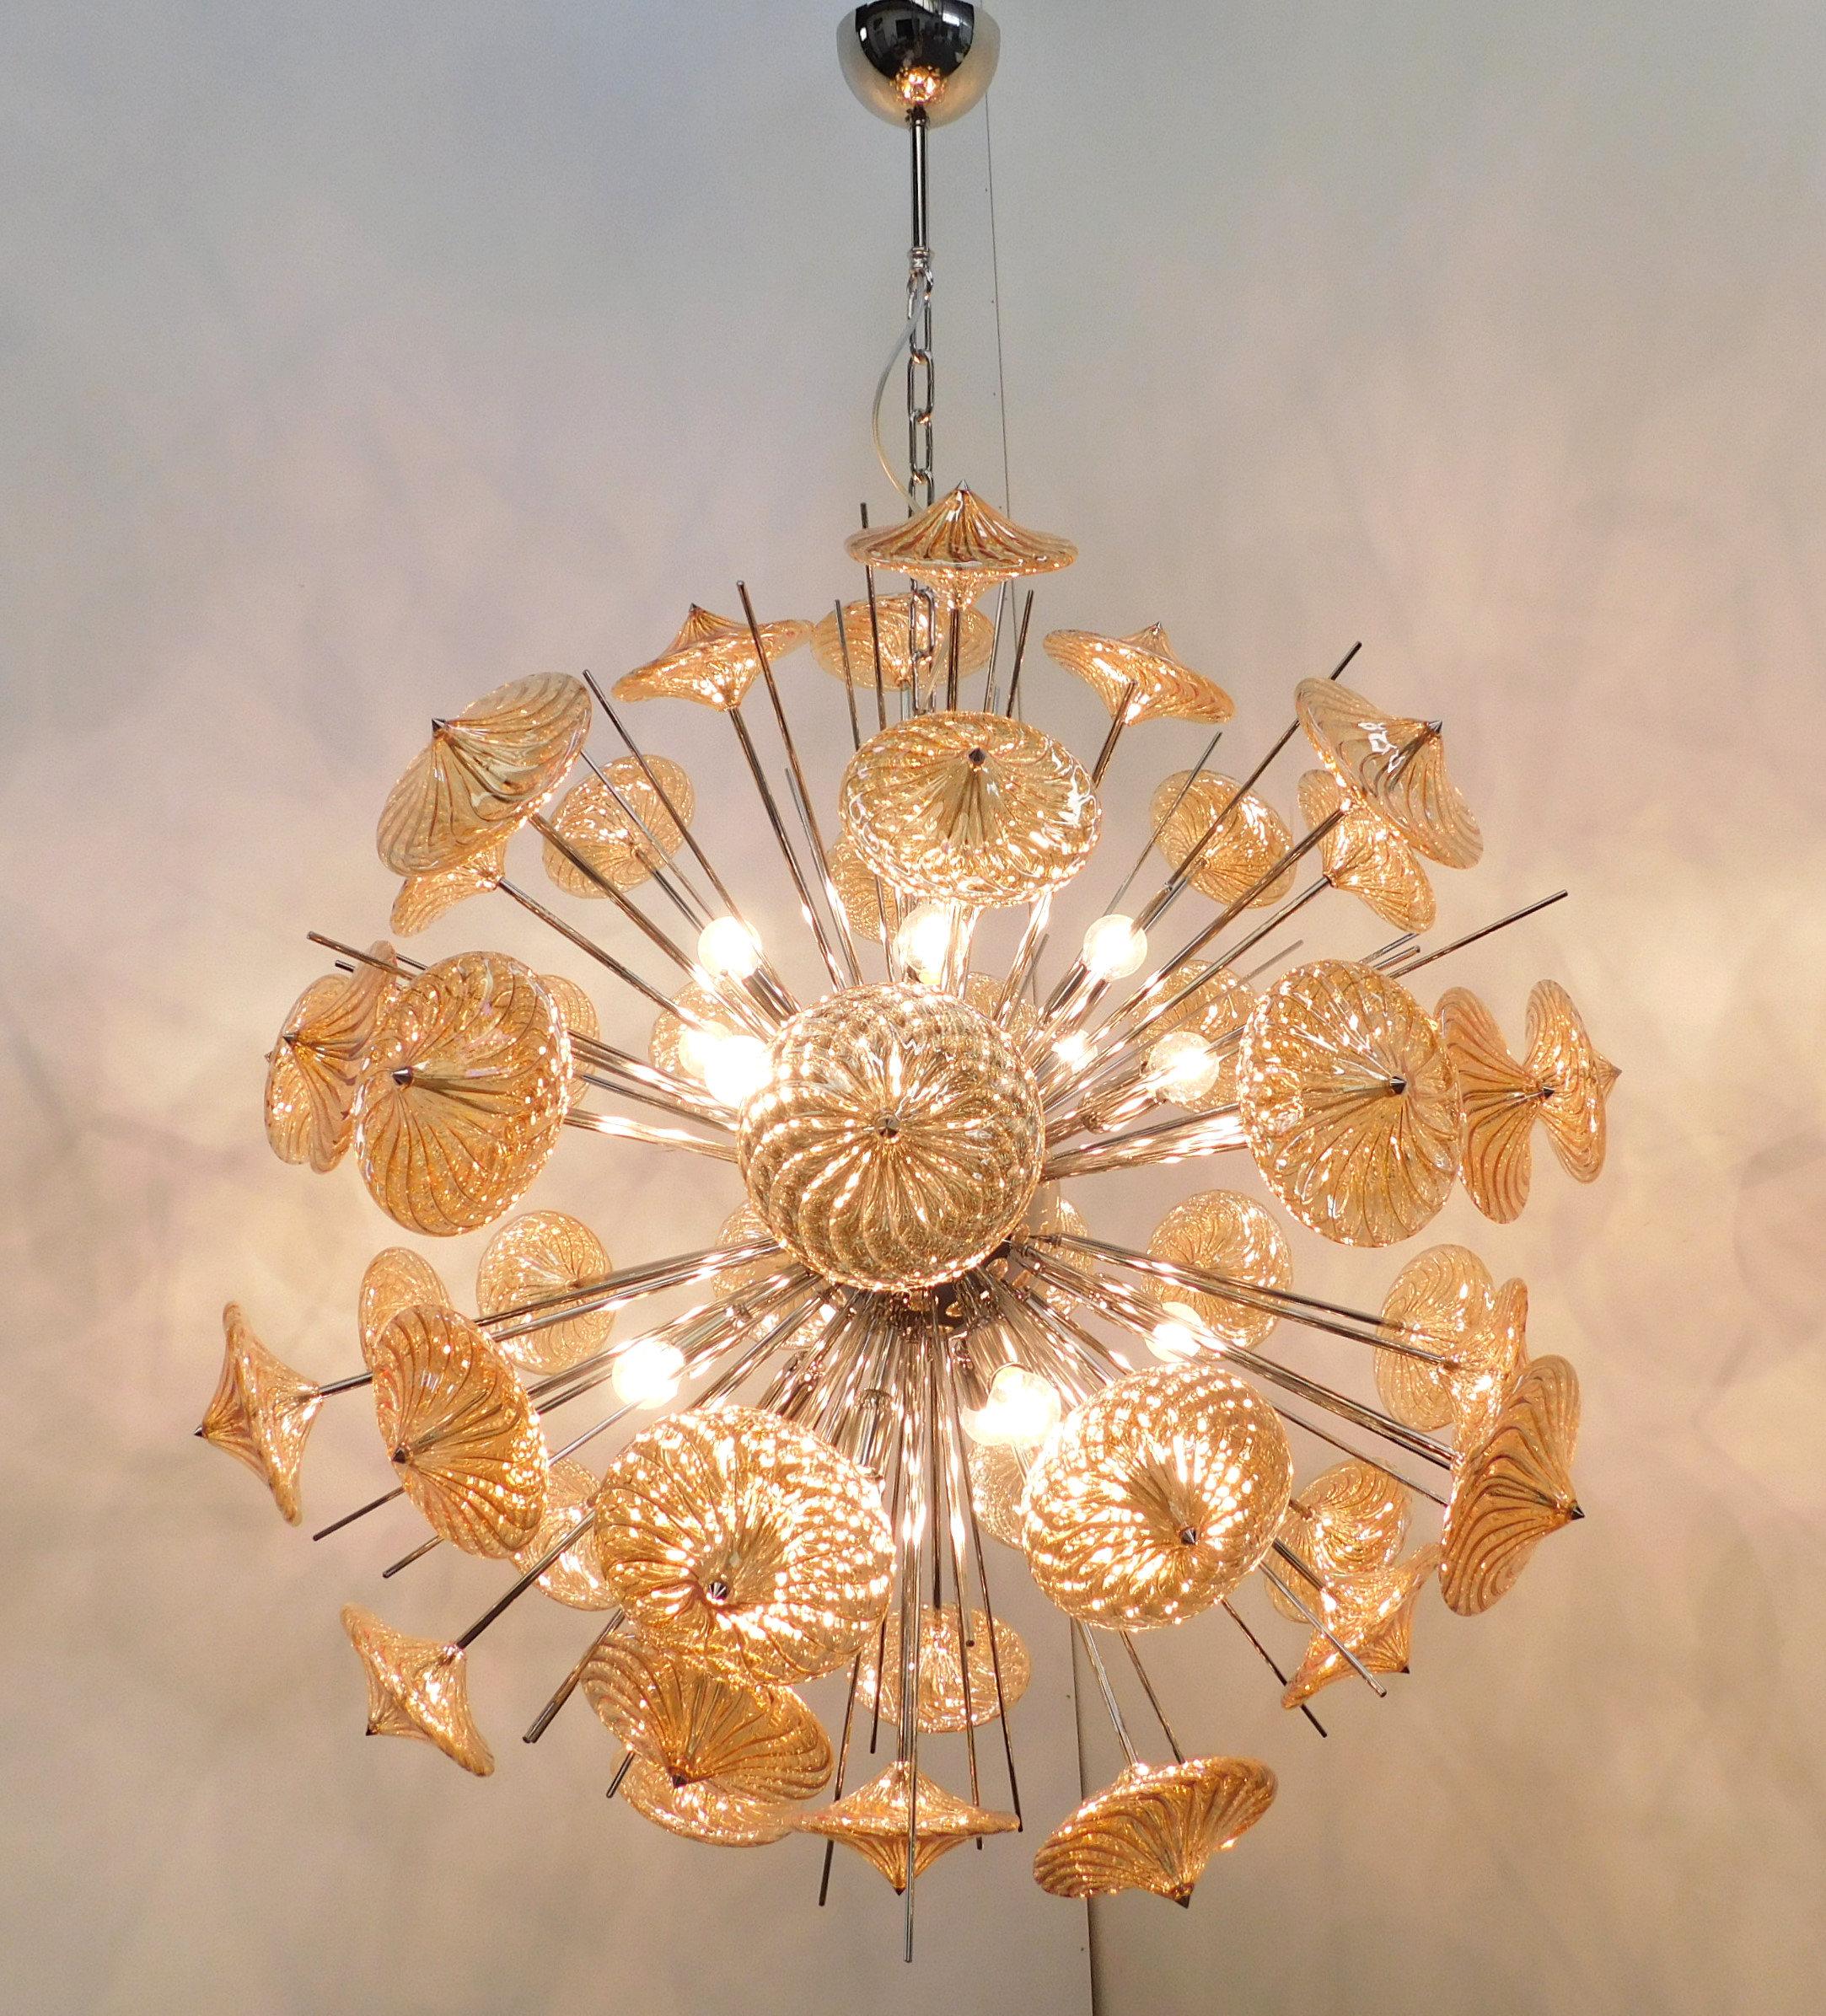 Italian modern Sputnik chandelier with amber Pyrex borosilicate glasses hand blown to produce a spiraled effect, mounted on polished nickel frame / Designed by Fabio Bergomi for Fabio Ltd / Made in Italy
16 lights / E26 or E27 type / max 60W